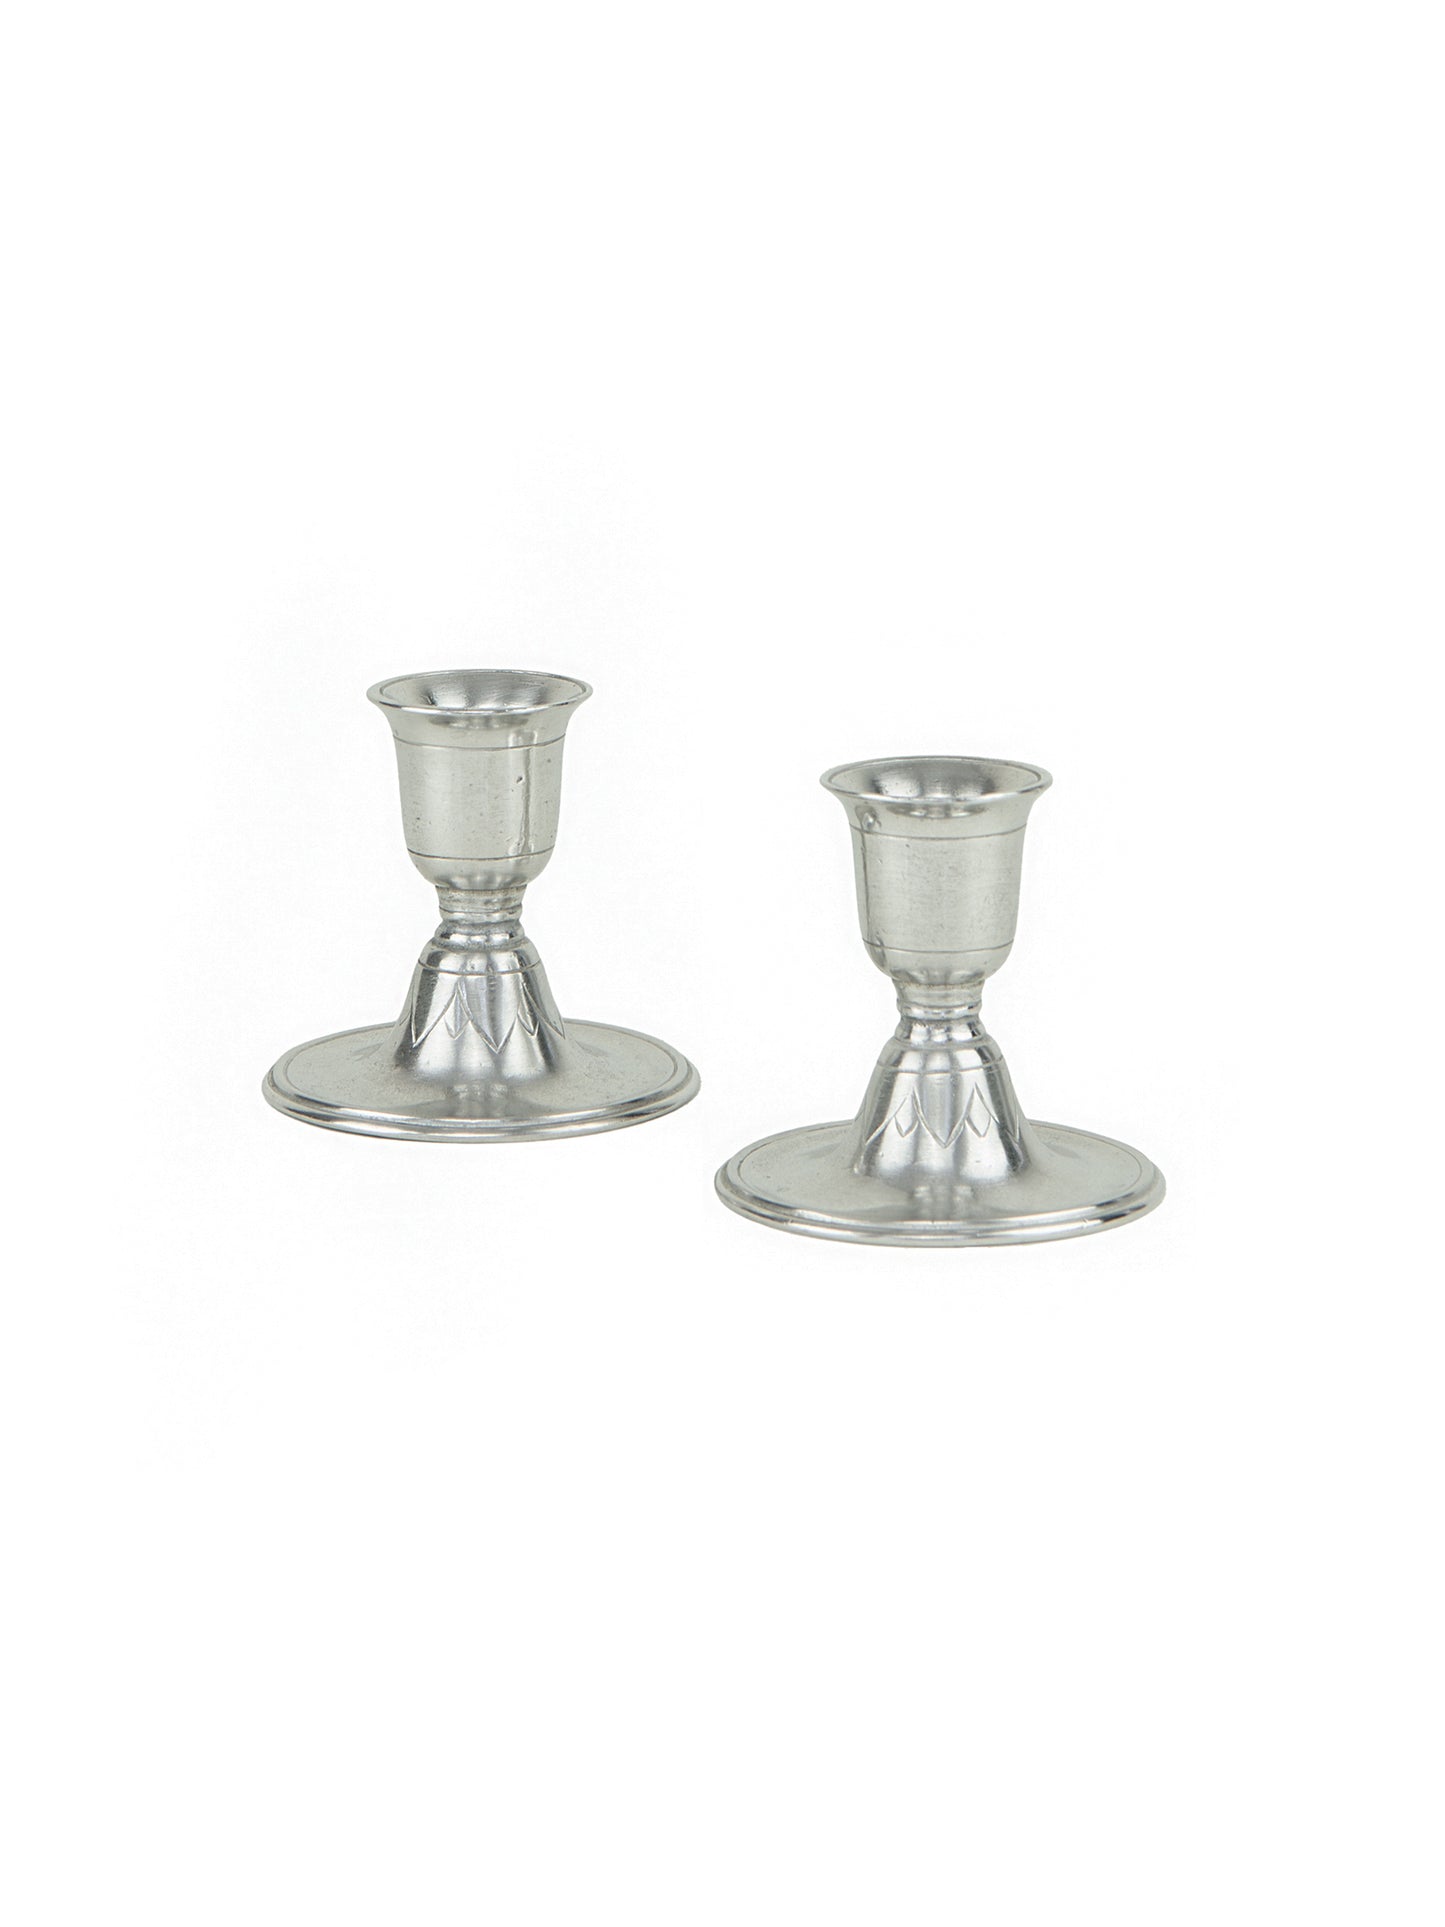 MATCH Pewter Short Candlestick Pair Weston Table